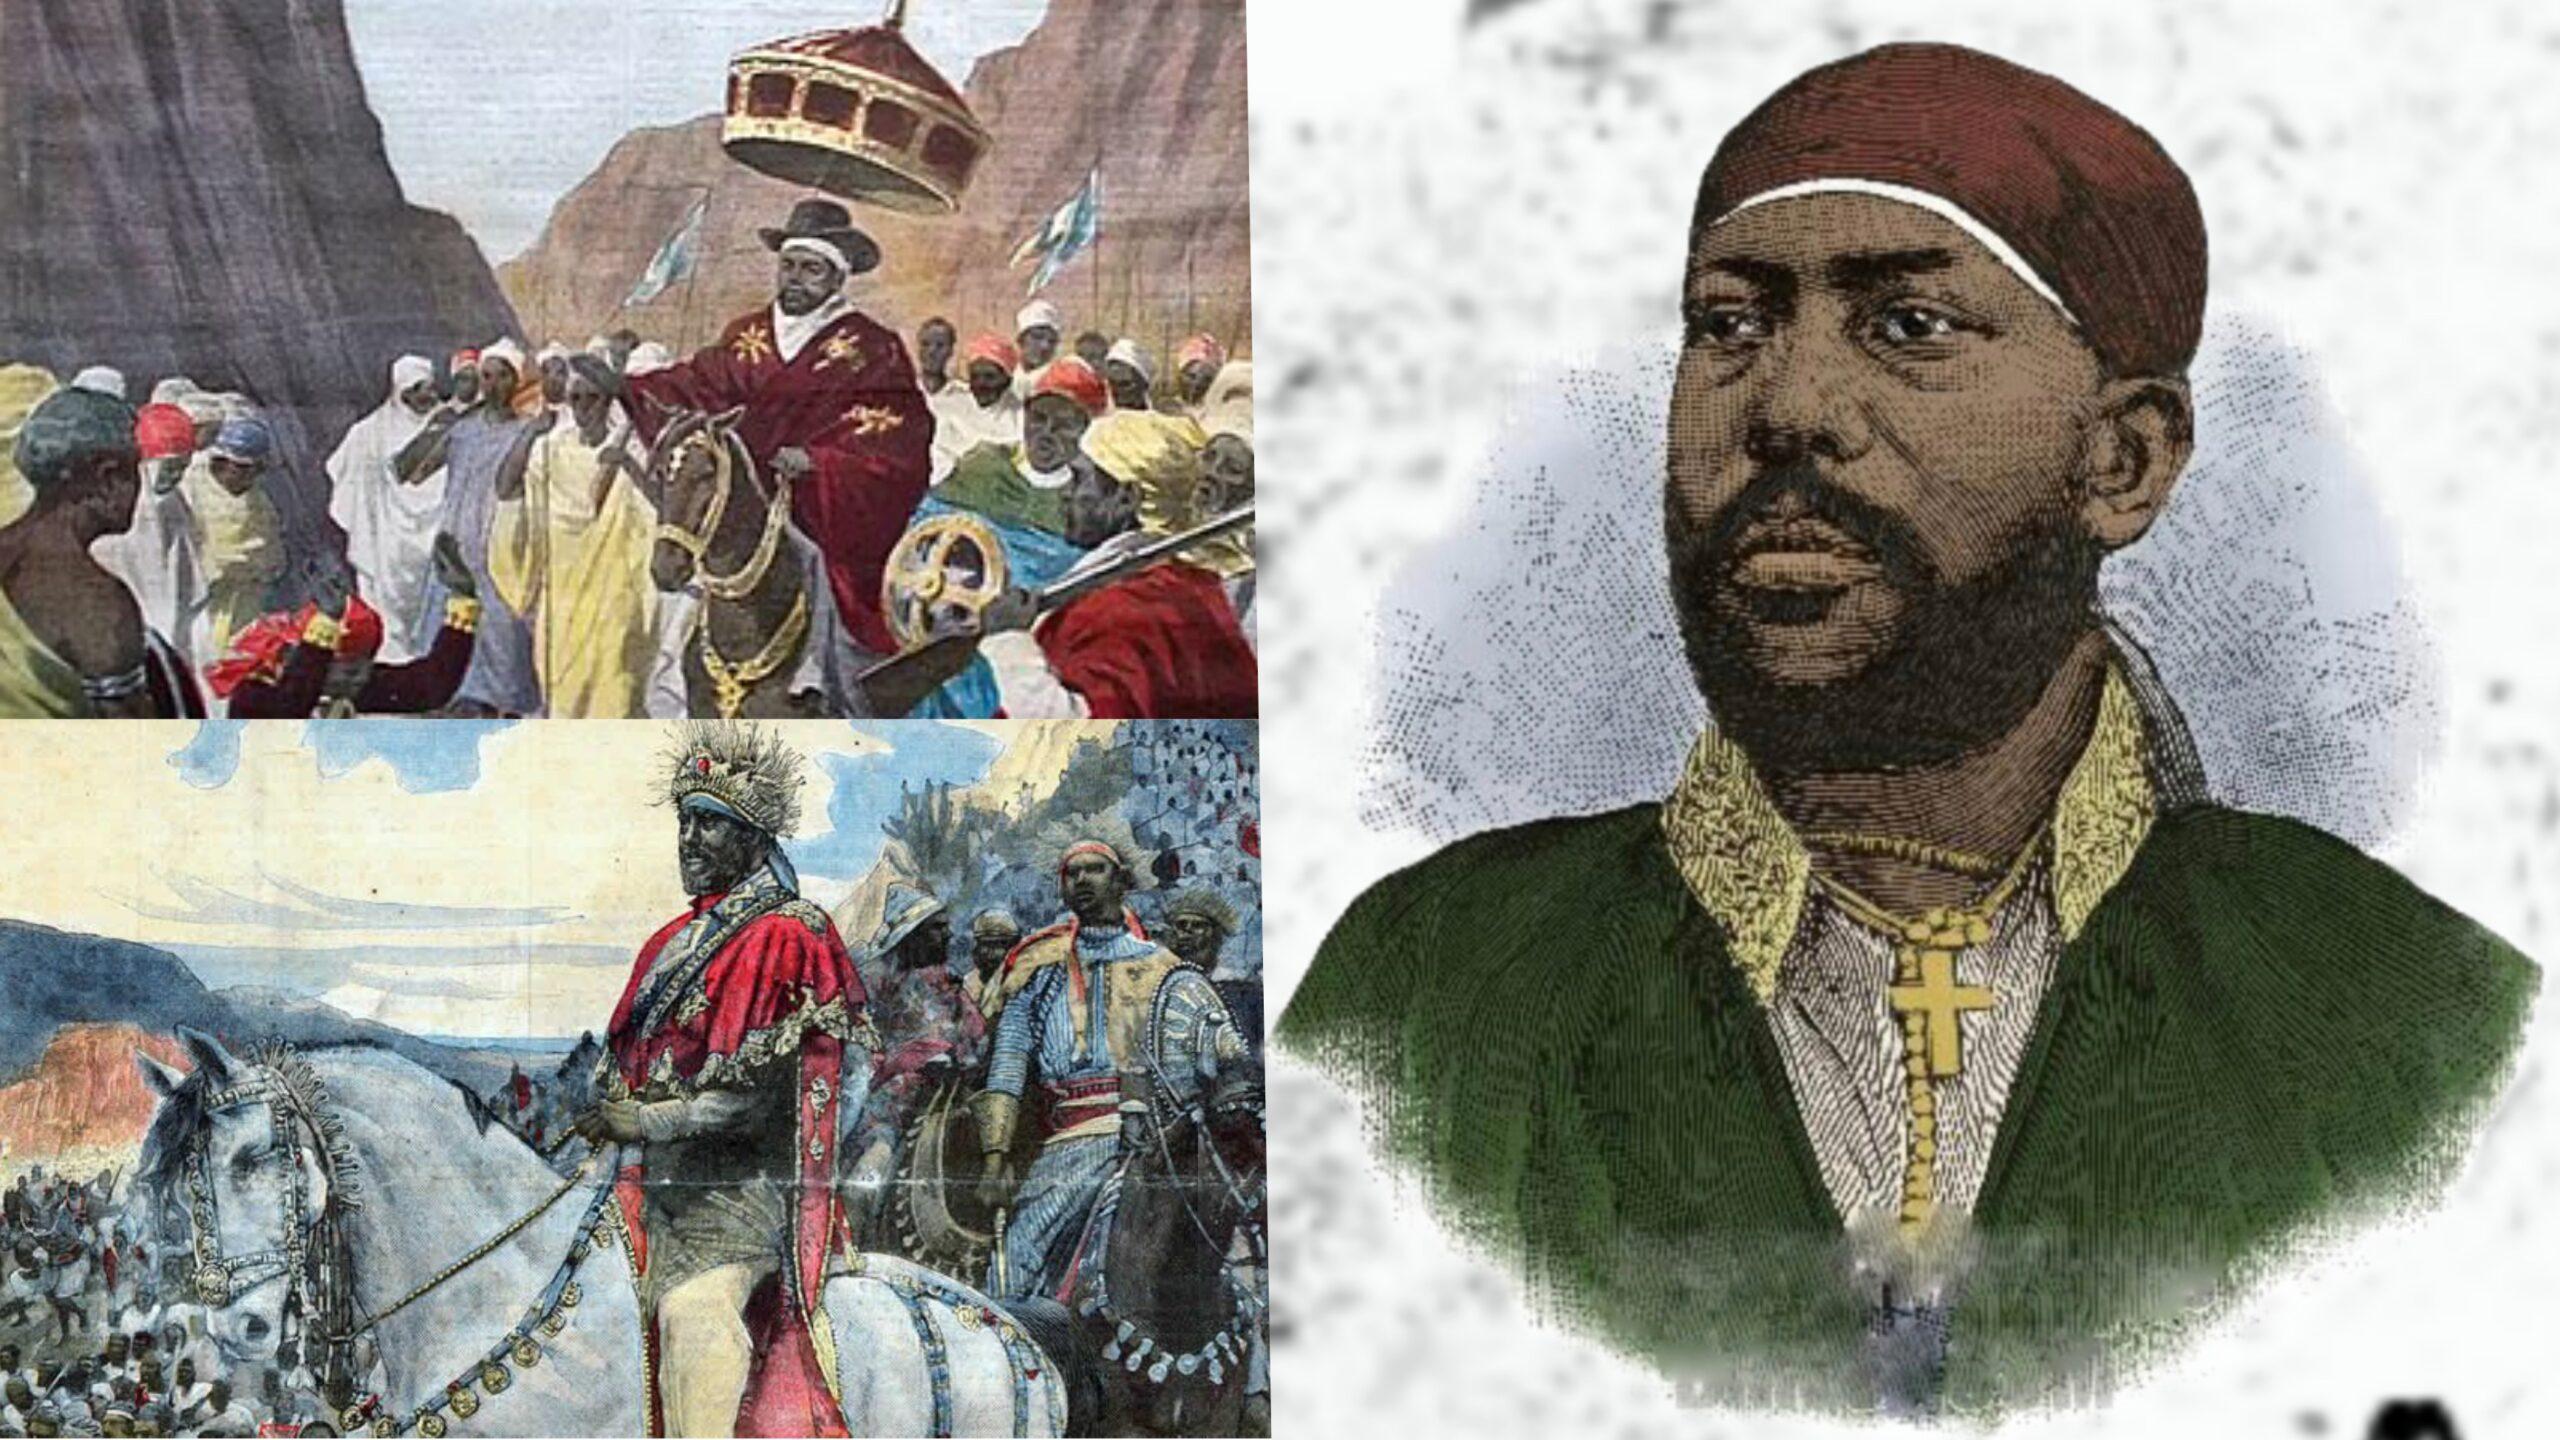 King Menelik II, the lion of the Battle of Adwa 1896 where Ethiopian Empire defeated Italian army